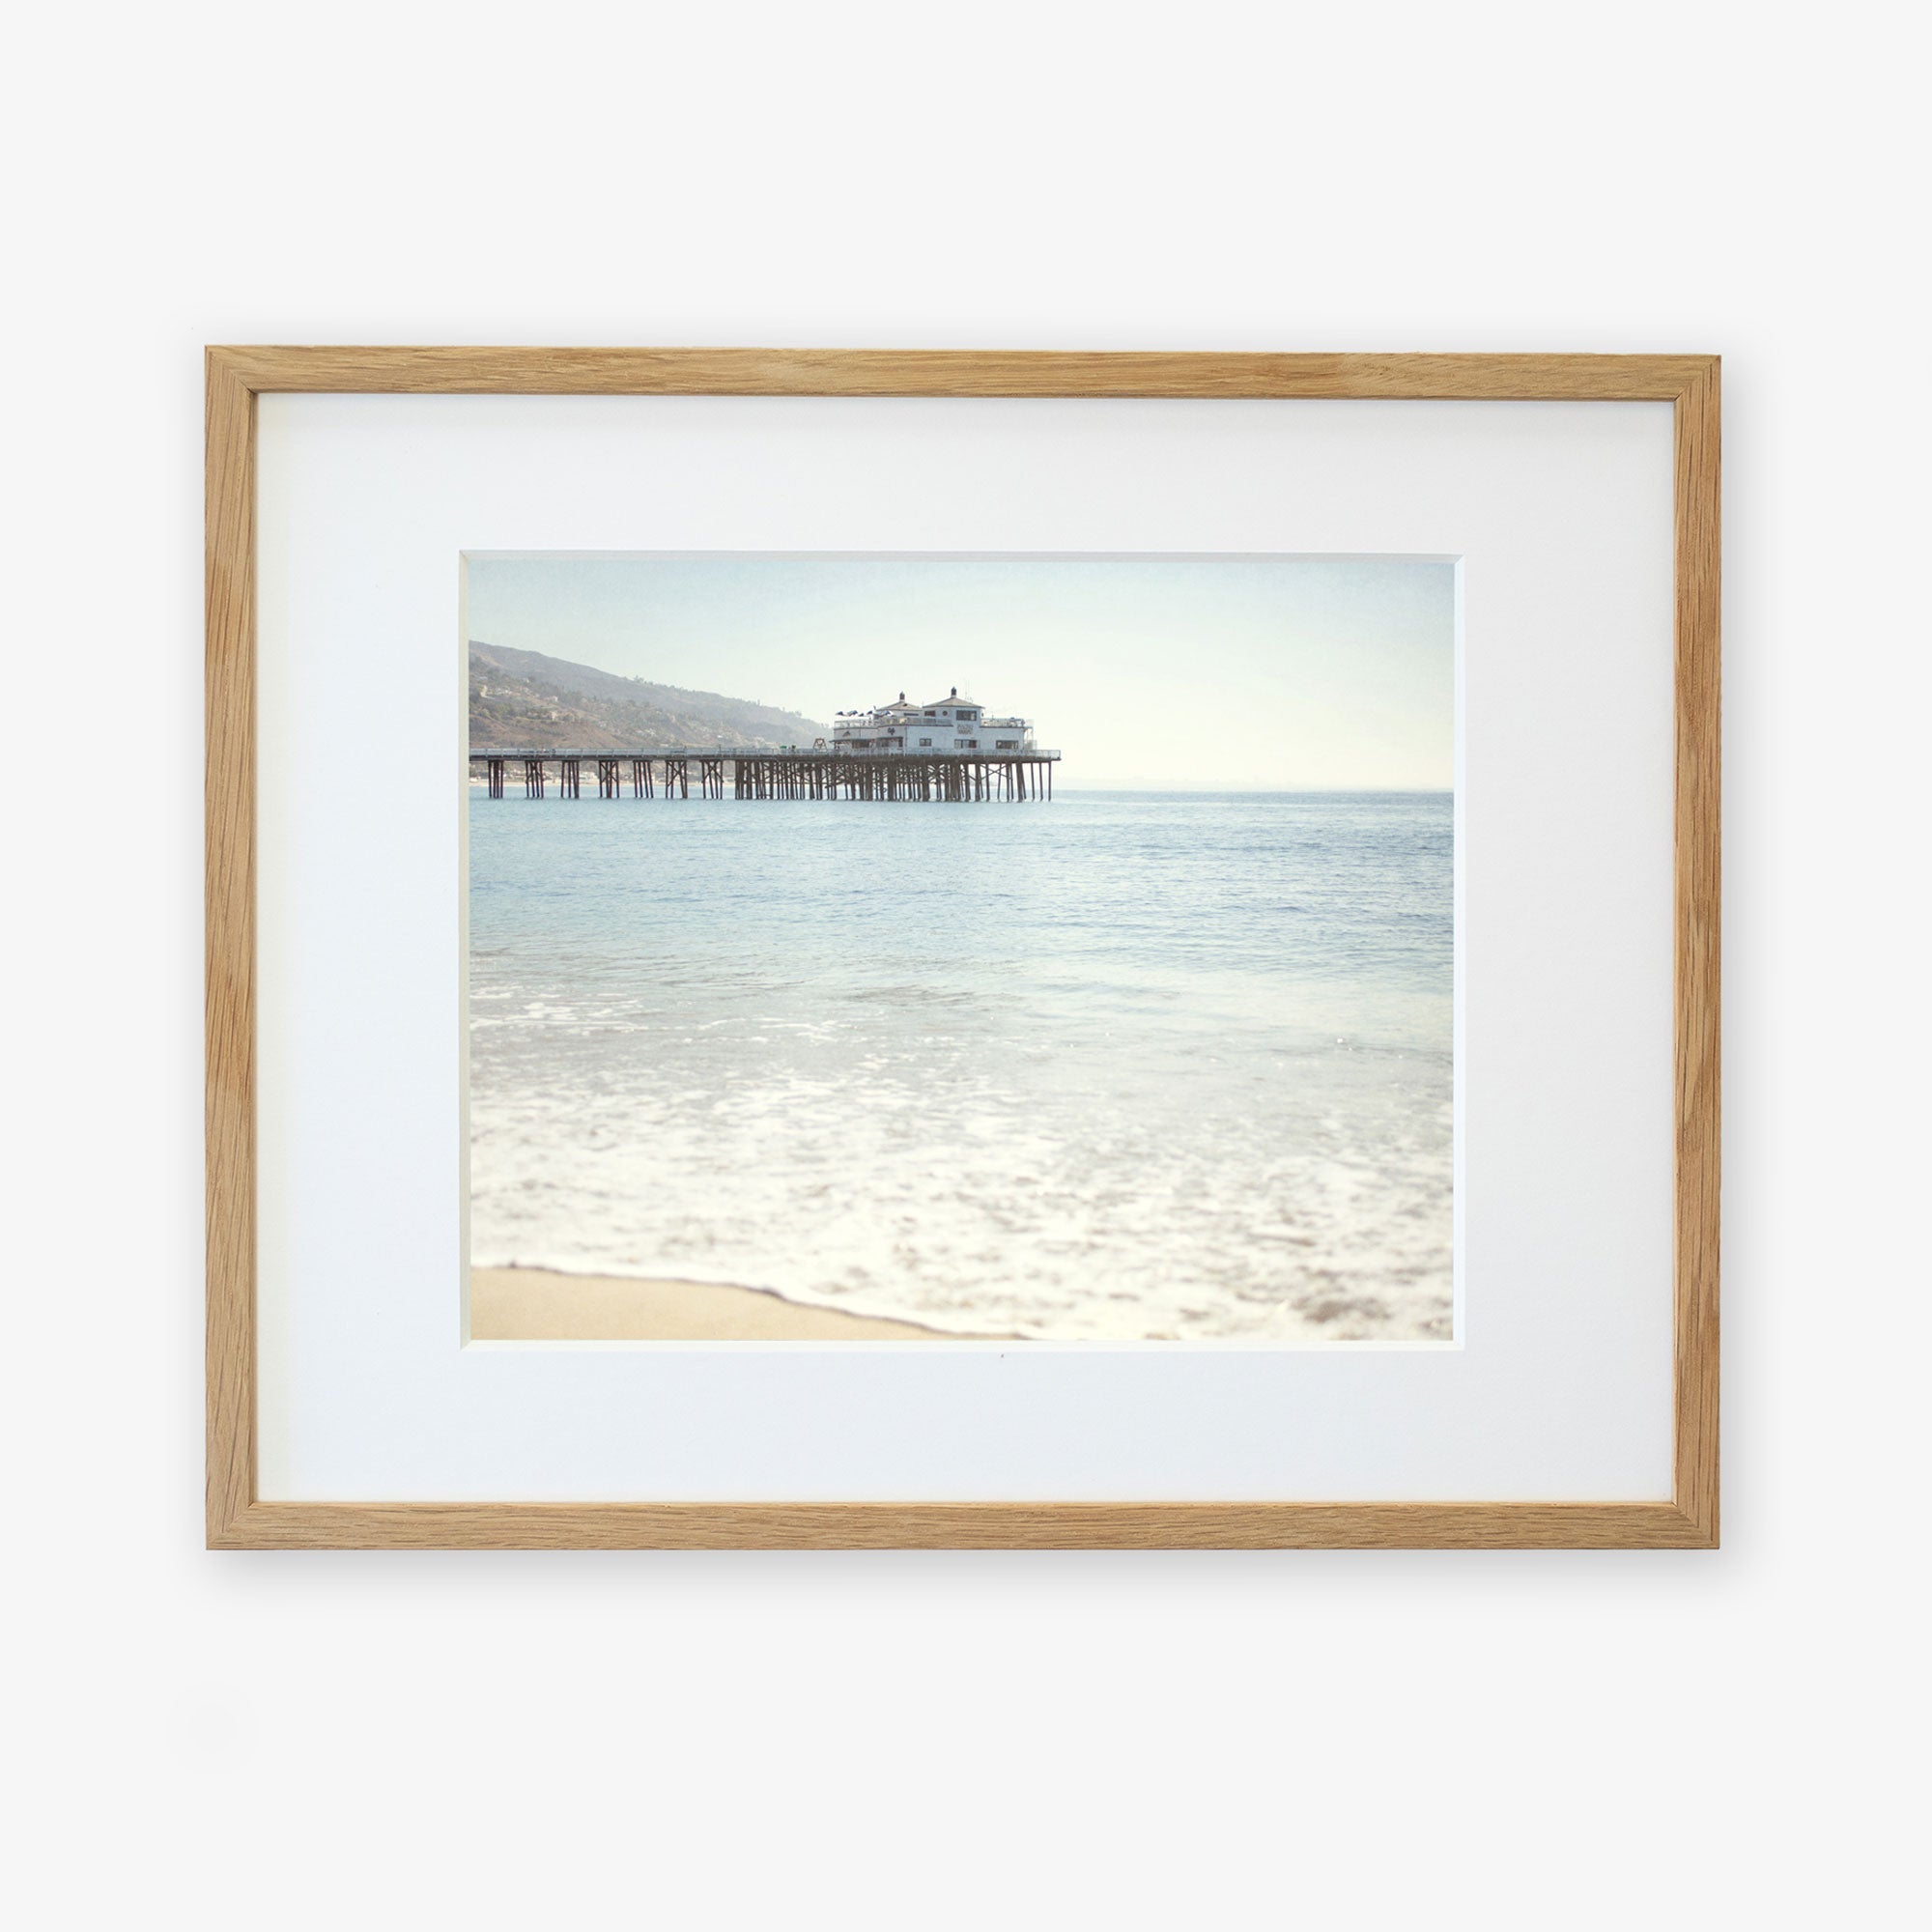 Framed photograph of a tranquil beach scene with gentle waves lapping the shore and California Beach Print, 'Malibu Pier' extending into the calm blue sea, all under a clear sky by Offley Green.